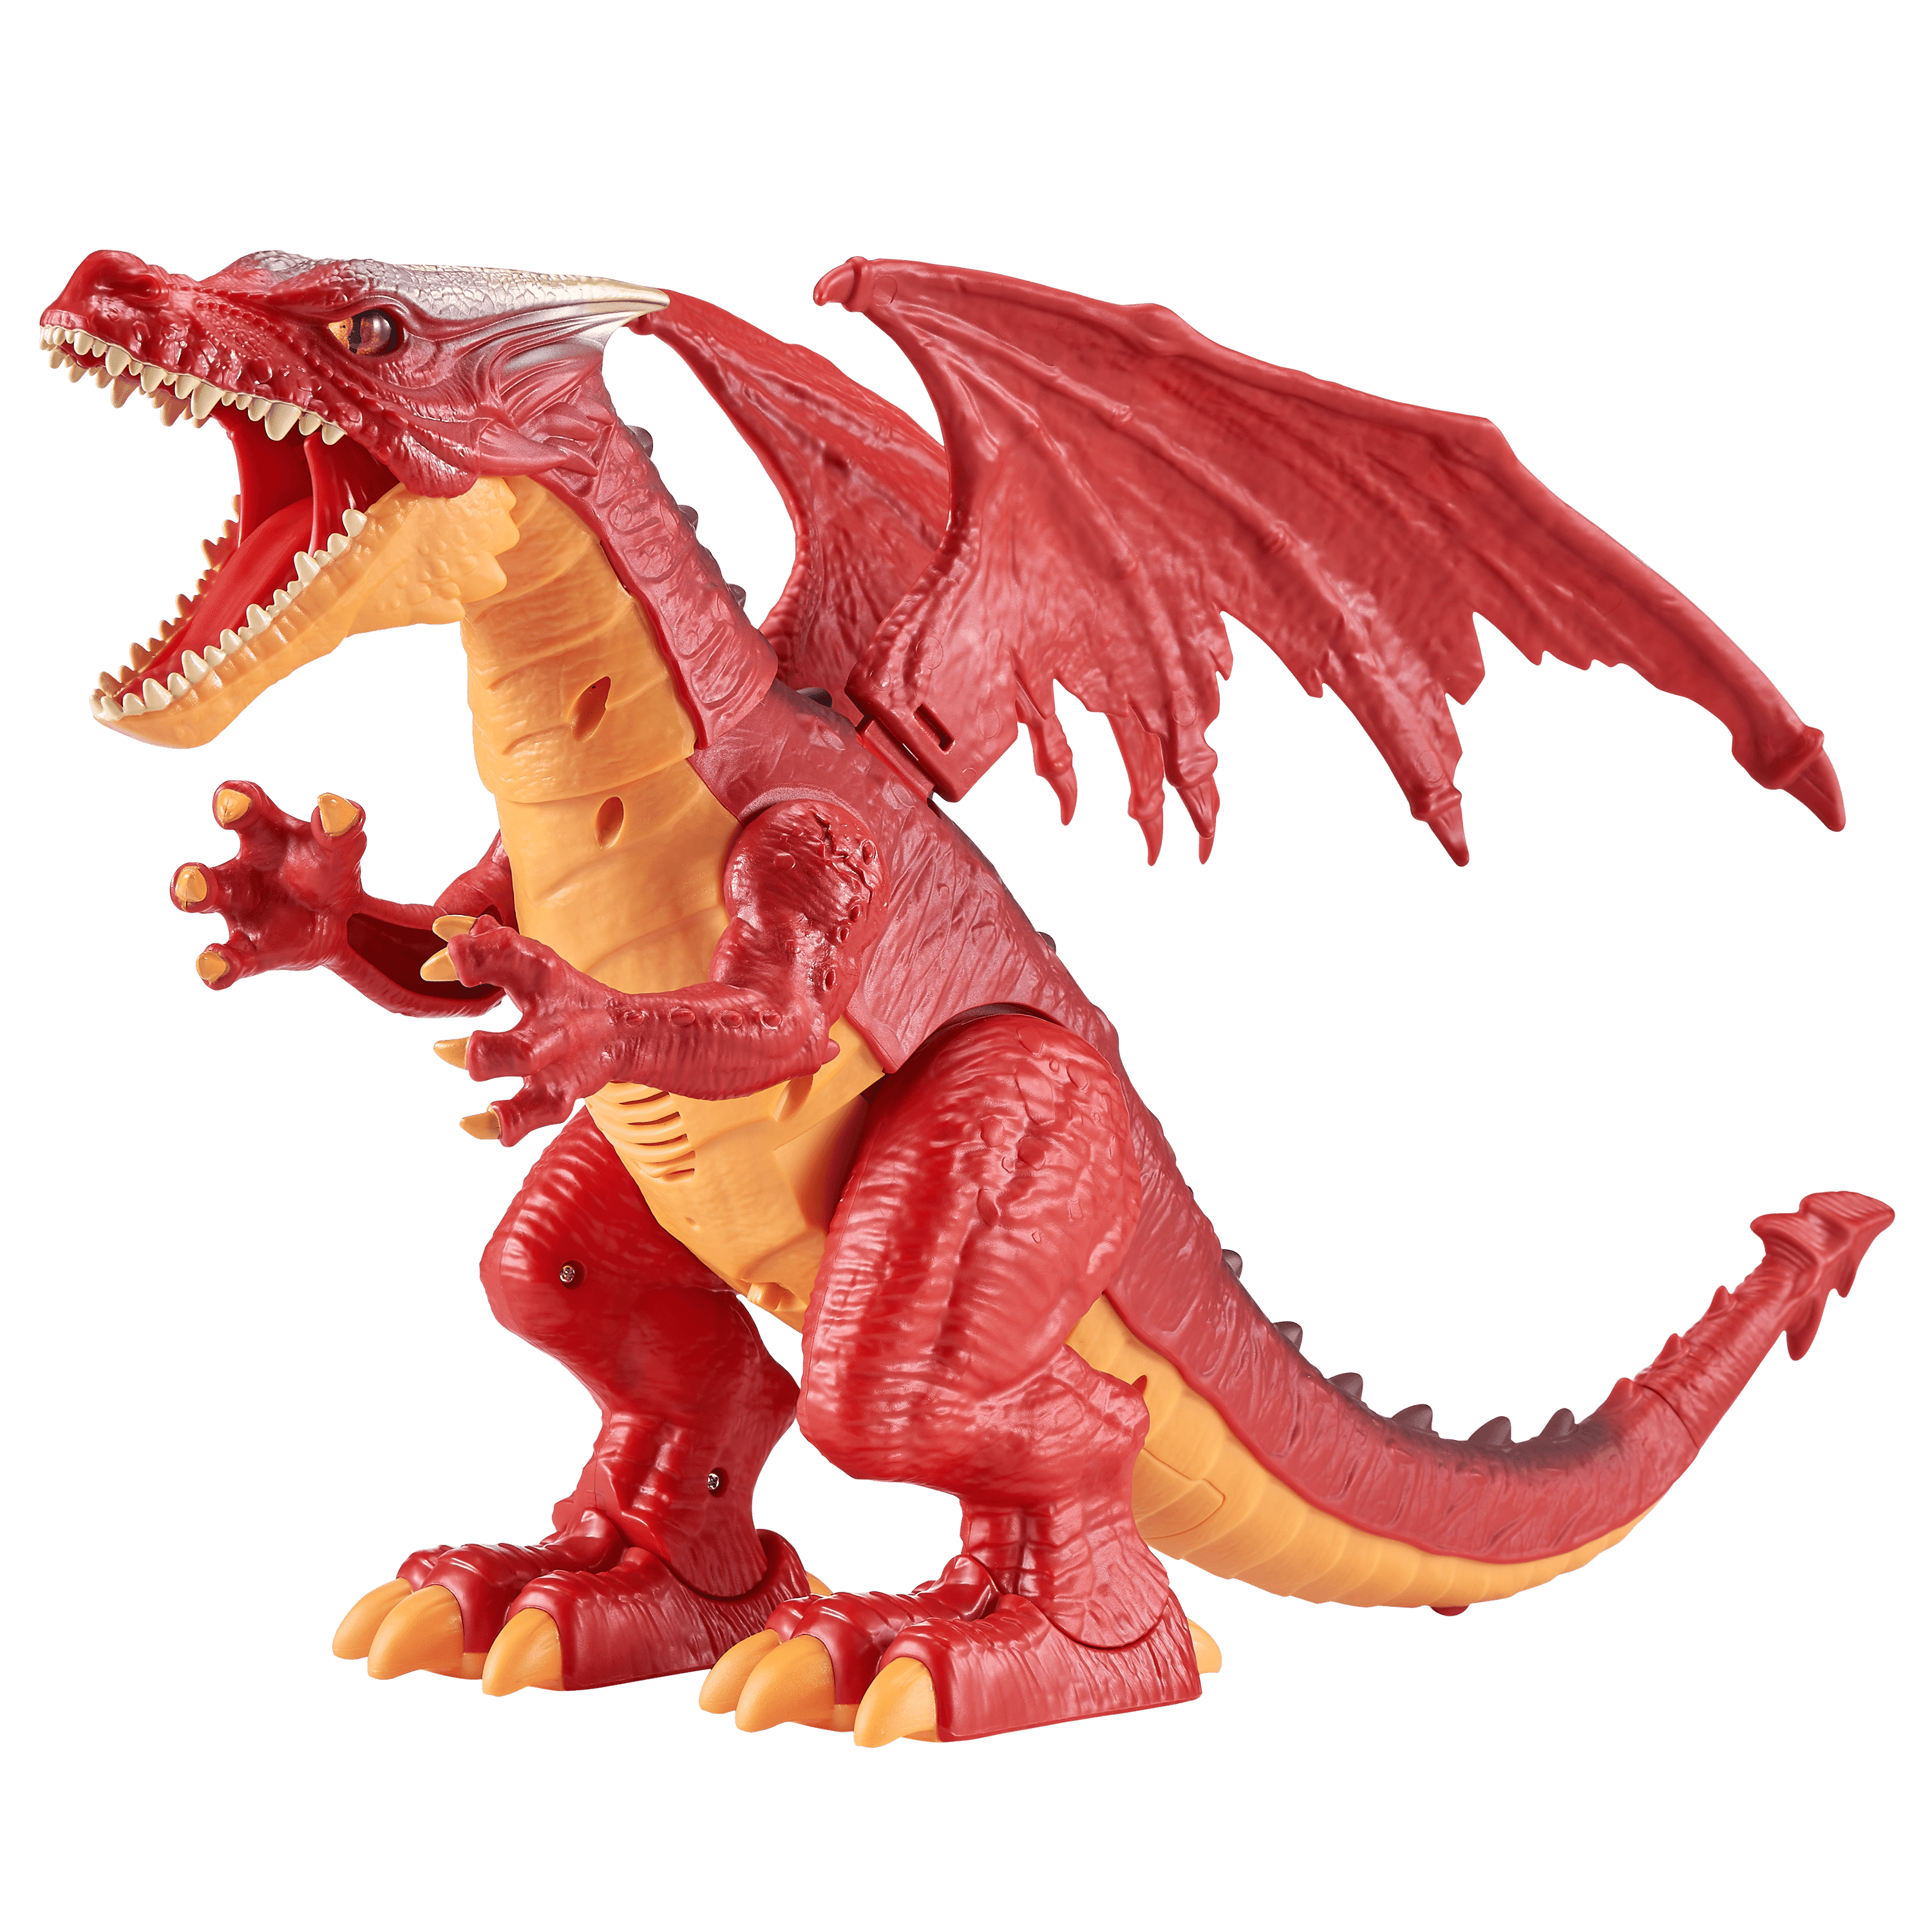 Details about   Robo Alive Roaring Ice Dragon Battery Powered Robotic Toy by Zuru 